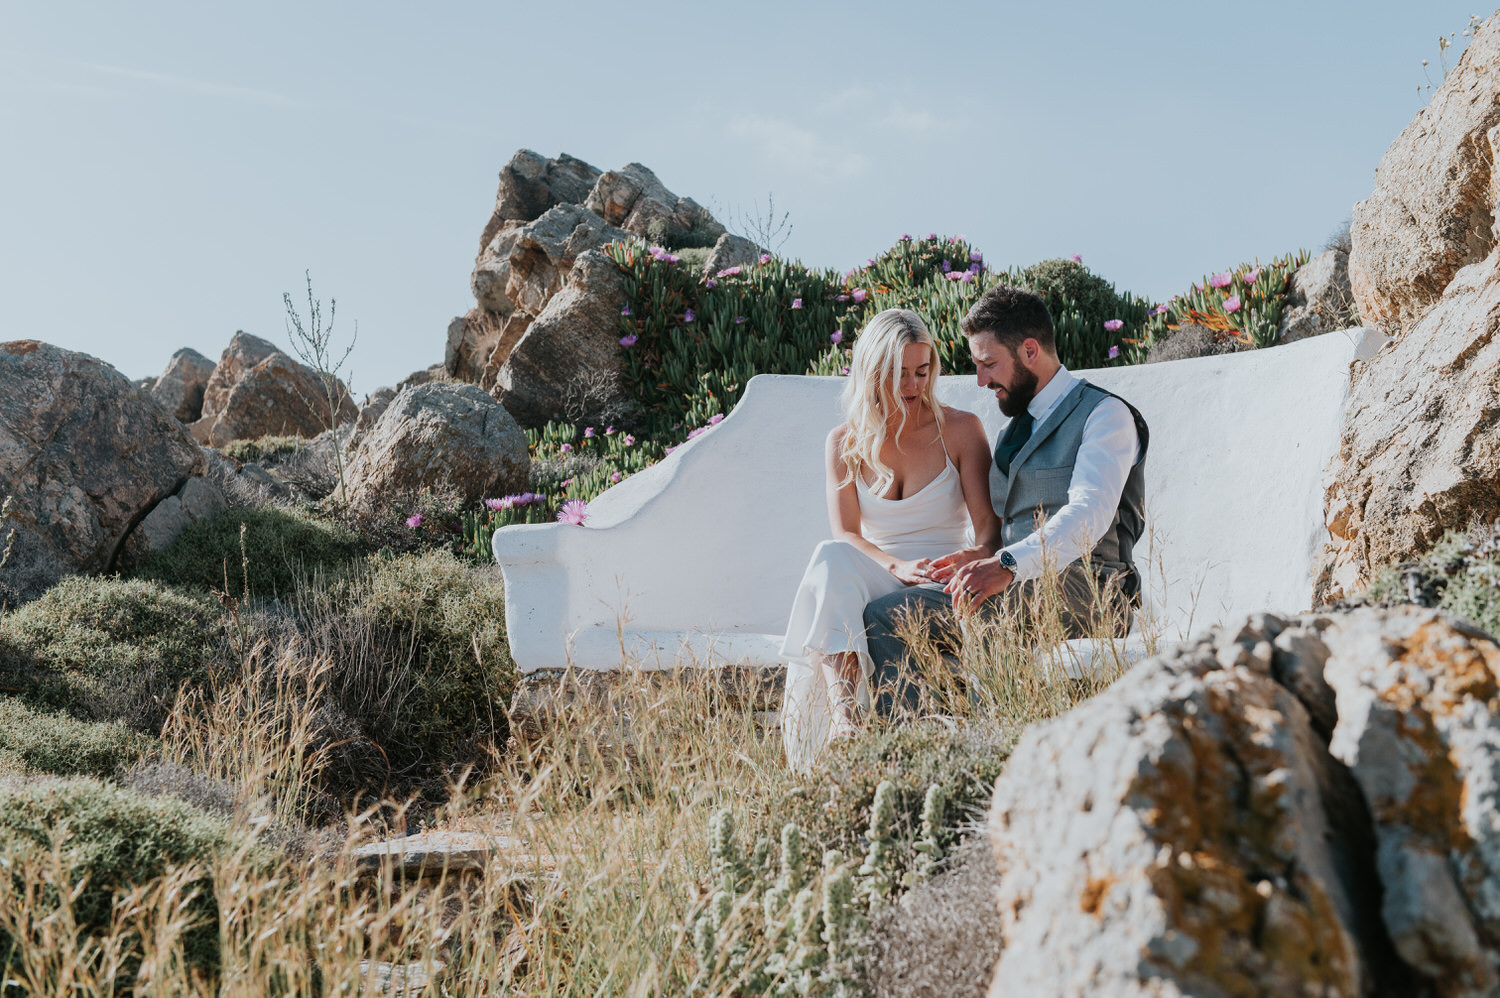 Mykonos wedding photographer: bride and groom sat on a bench nestled in the rocks looking at their hands in the afternoon light.